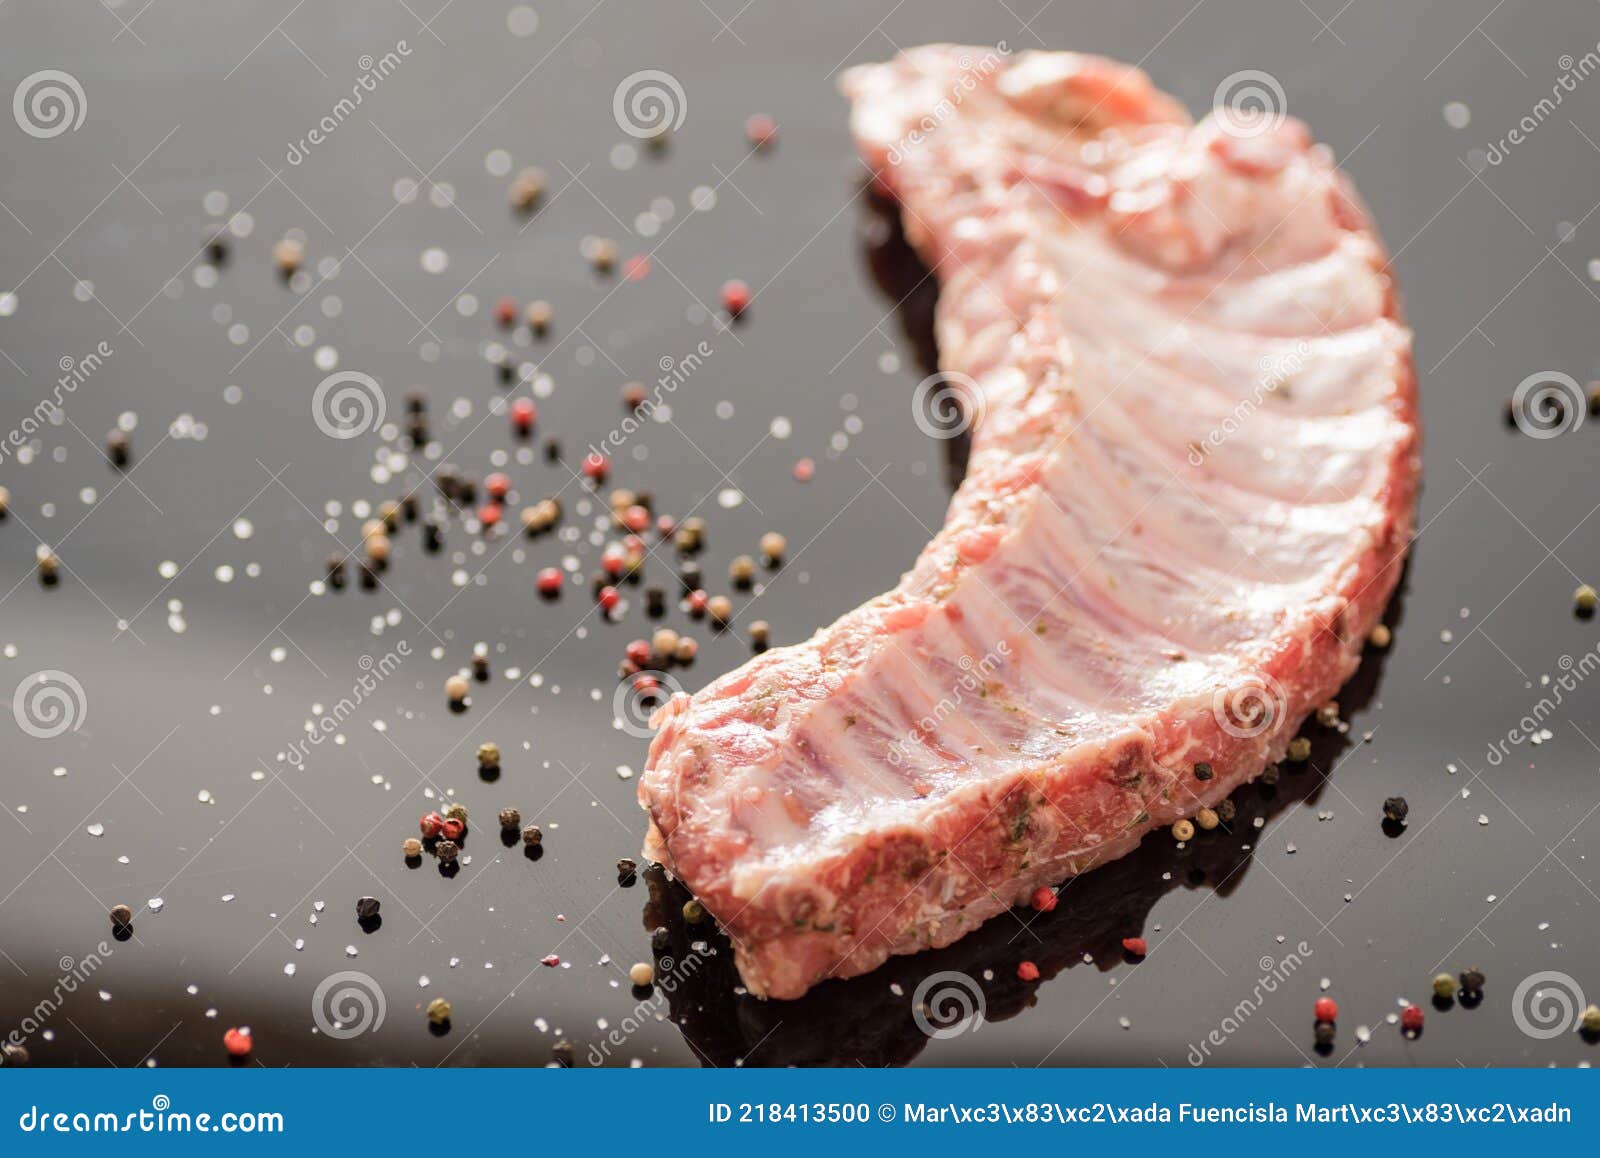 a closeup shot of raw pork ribs being cooked with seasonings